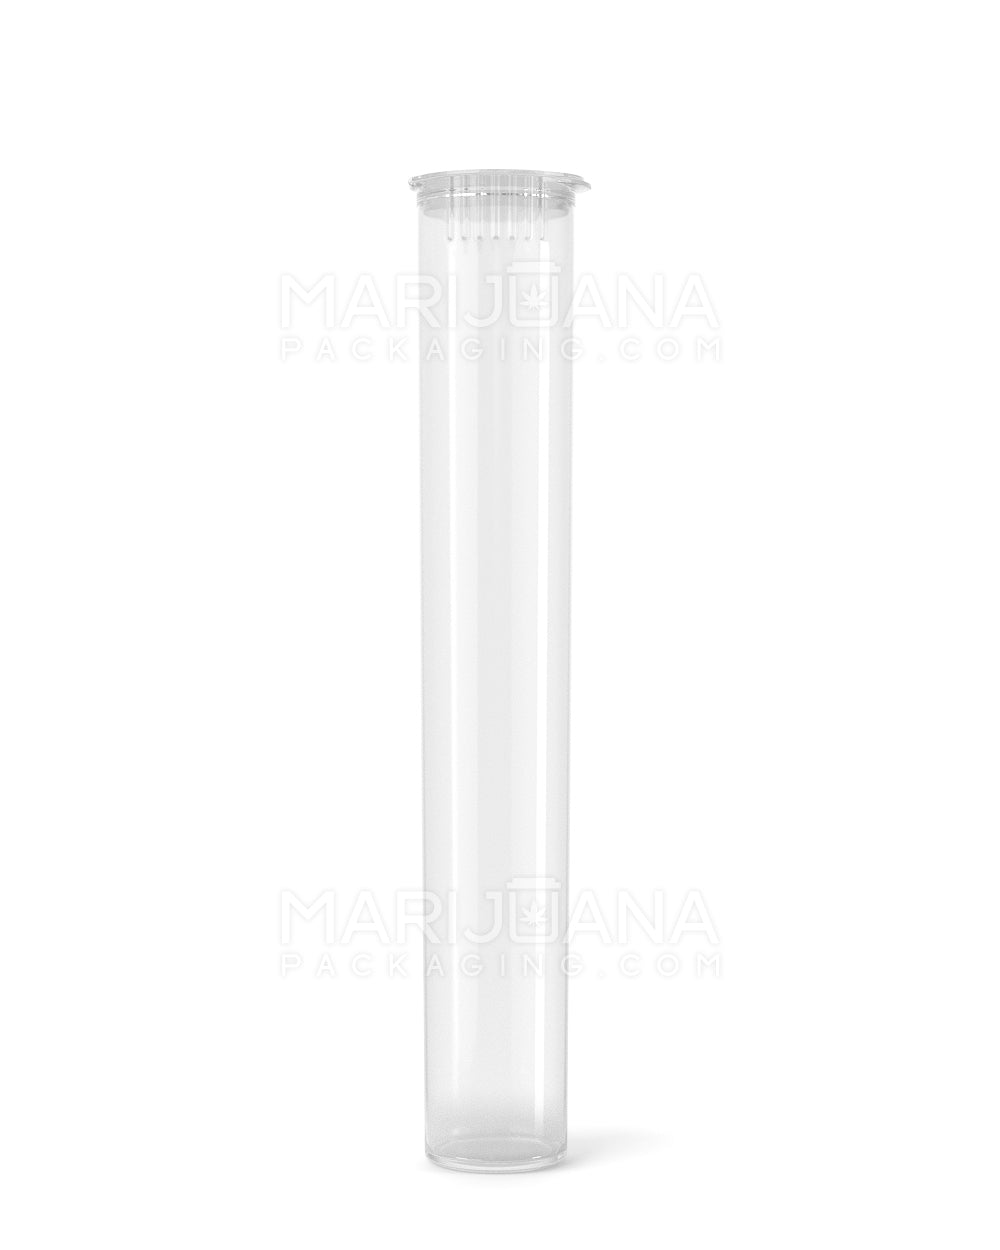 W Gallery 100 Clear 116mm Pop Top Tubes - Airtight Smell Proof Containers -  Plastic Medical Grade Prescription Bottles for Pills Herbs Flowers